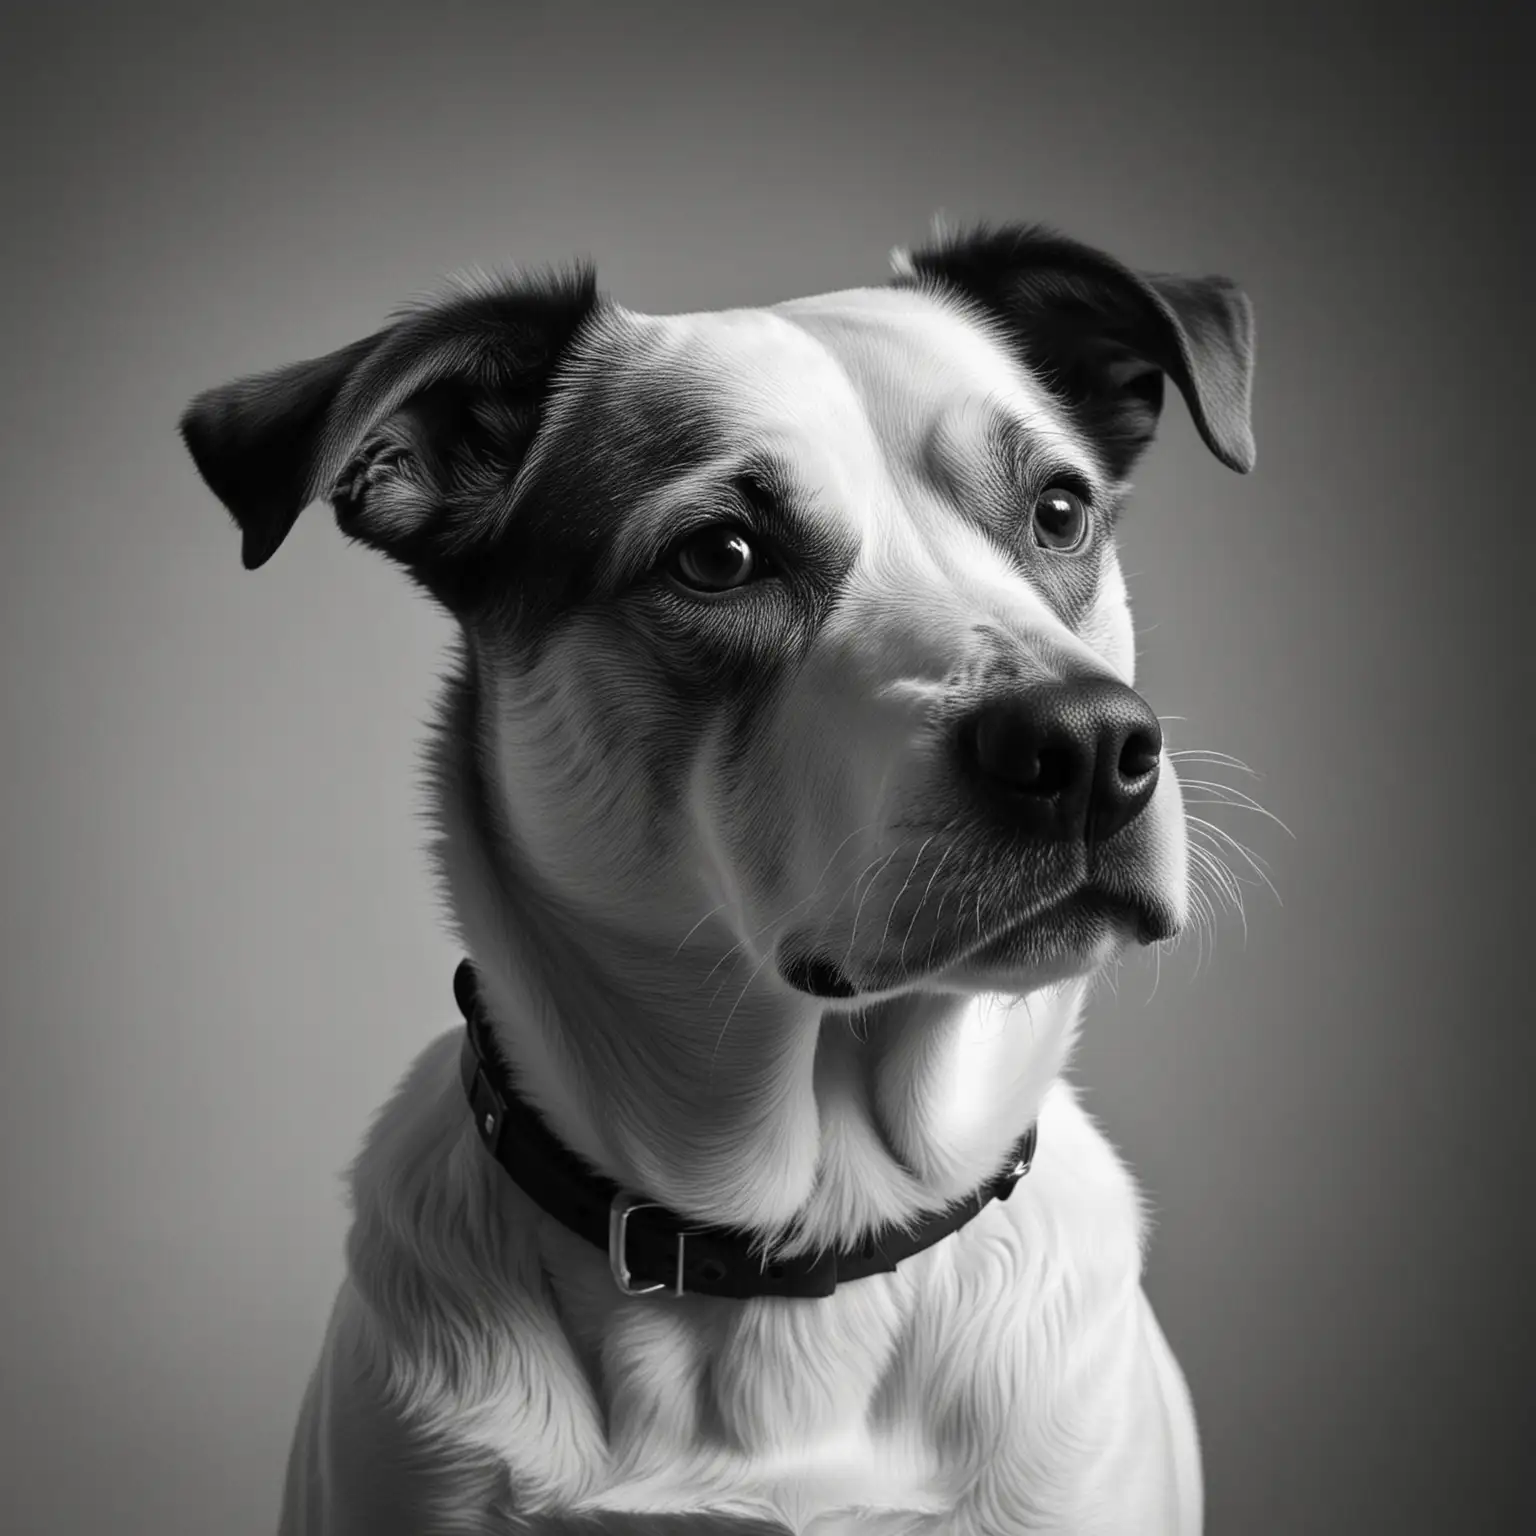 a dog with brown hair and black snout posing for a black and white photo, in the style of contrasting lights and darks, spanish school, social media portraiture, jonathan wolstenholme, cinestill 50d, jusepe de ribera, mary beale